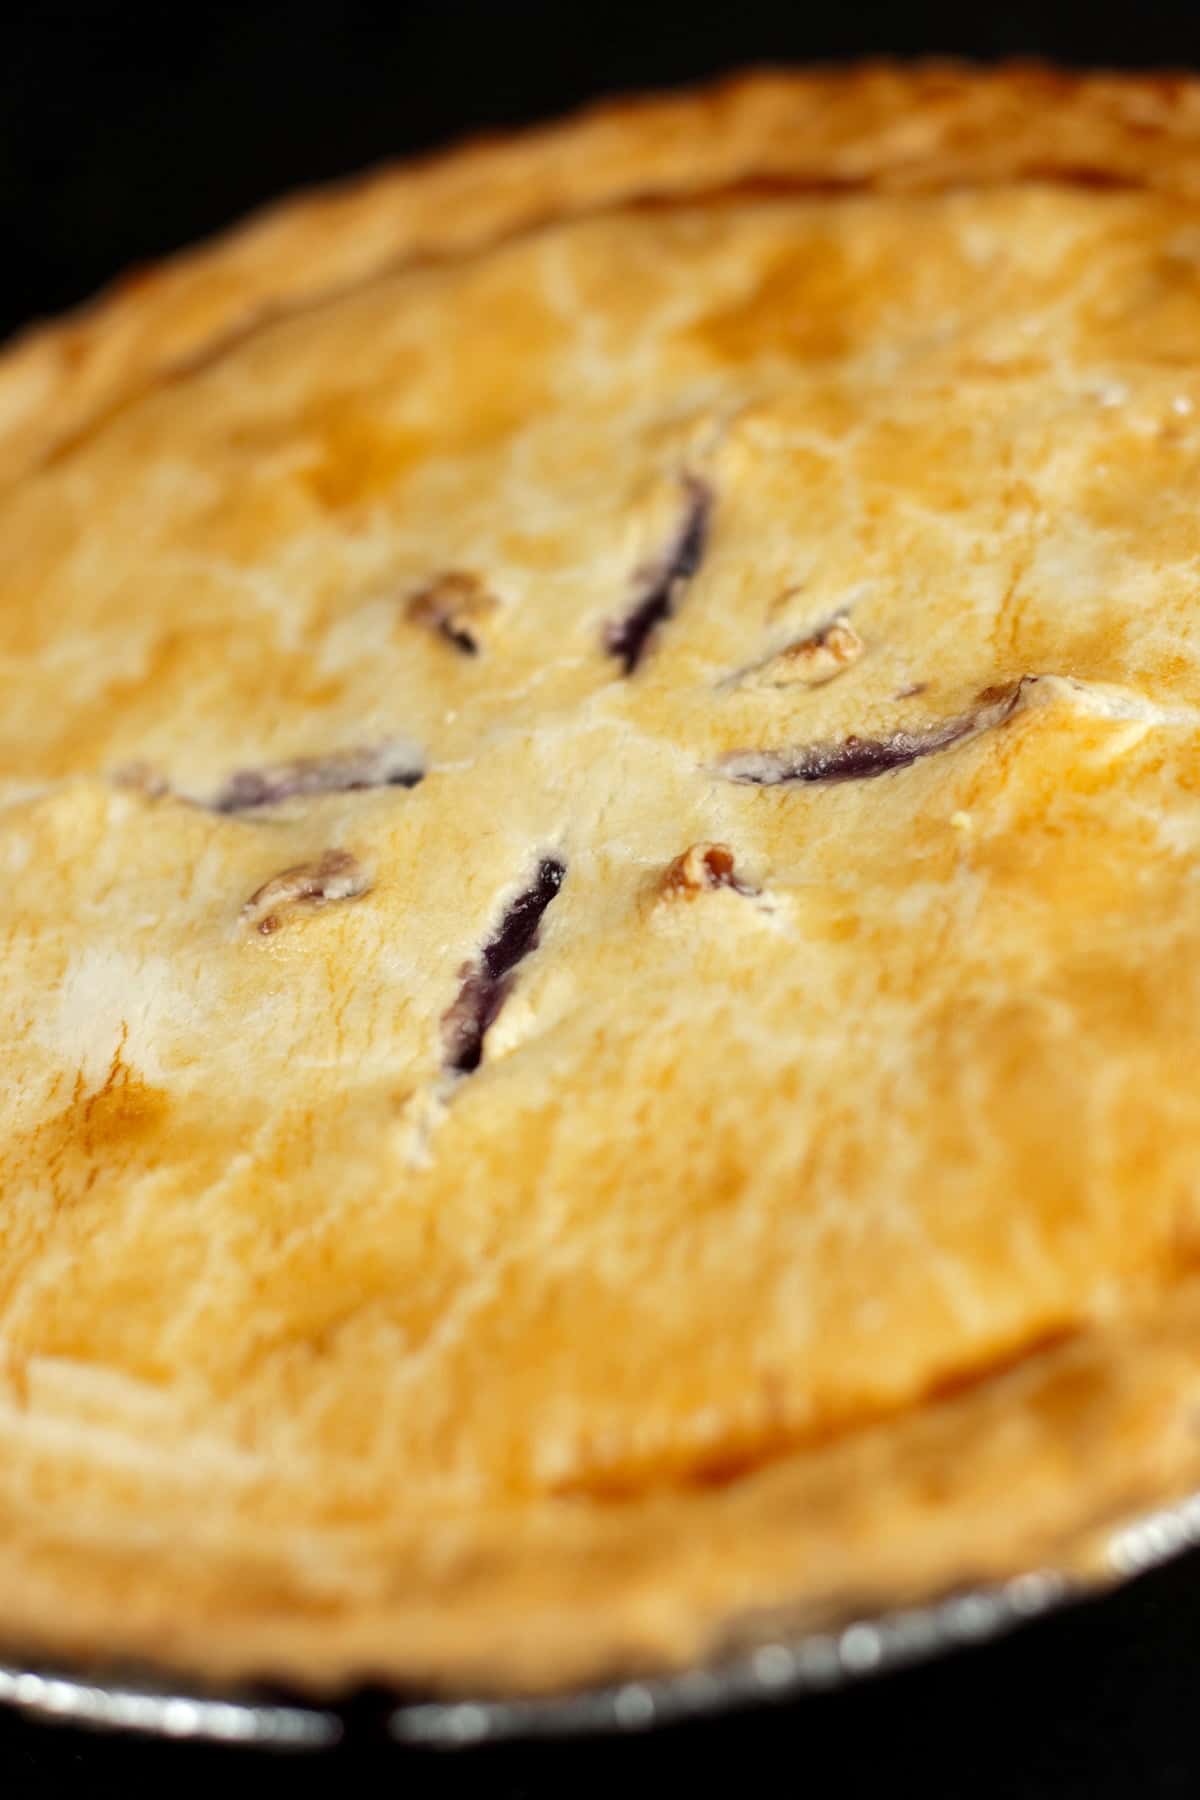 A whole 2-crust pie, against a black background. Slits cut into the top crust reveal it to be a blueberry pie.